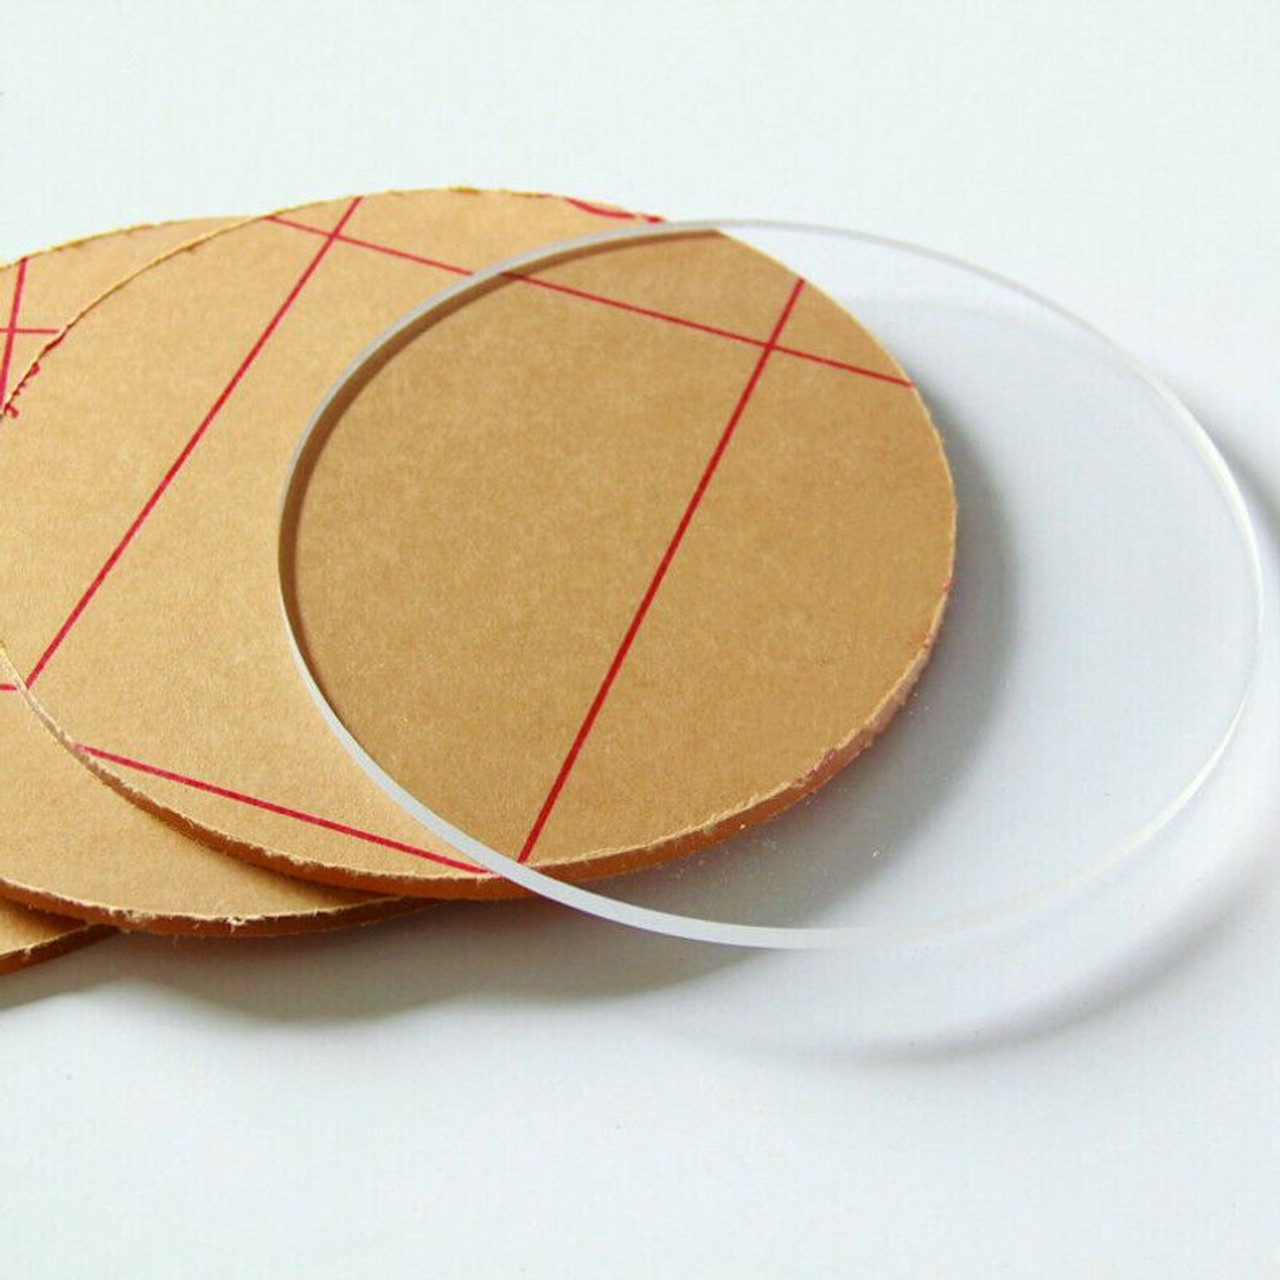 2/3/4 Inch Clear Acrylic Circle Sheet Acrylic Round Disc Blank Circle for  Cake Holders Coasters Painting Art Project DIY Crafts - AliExpress